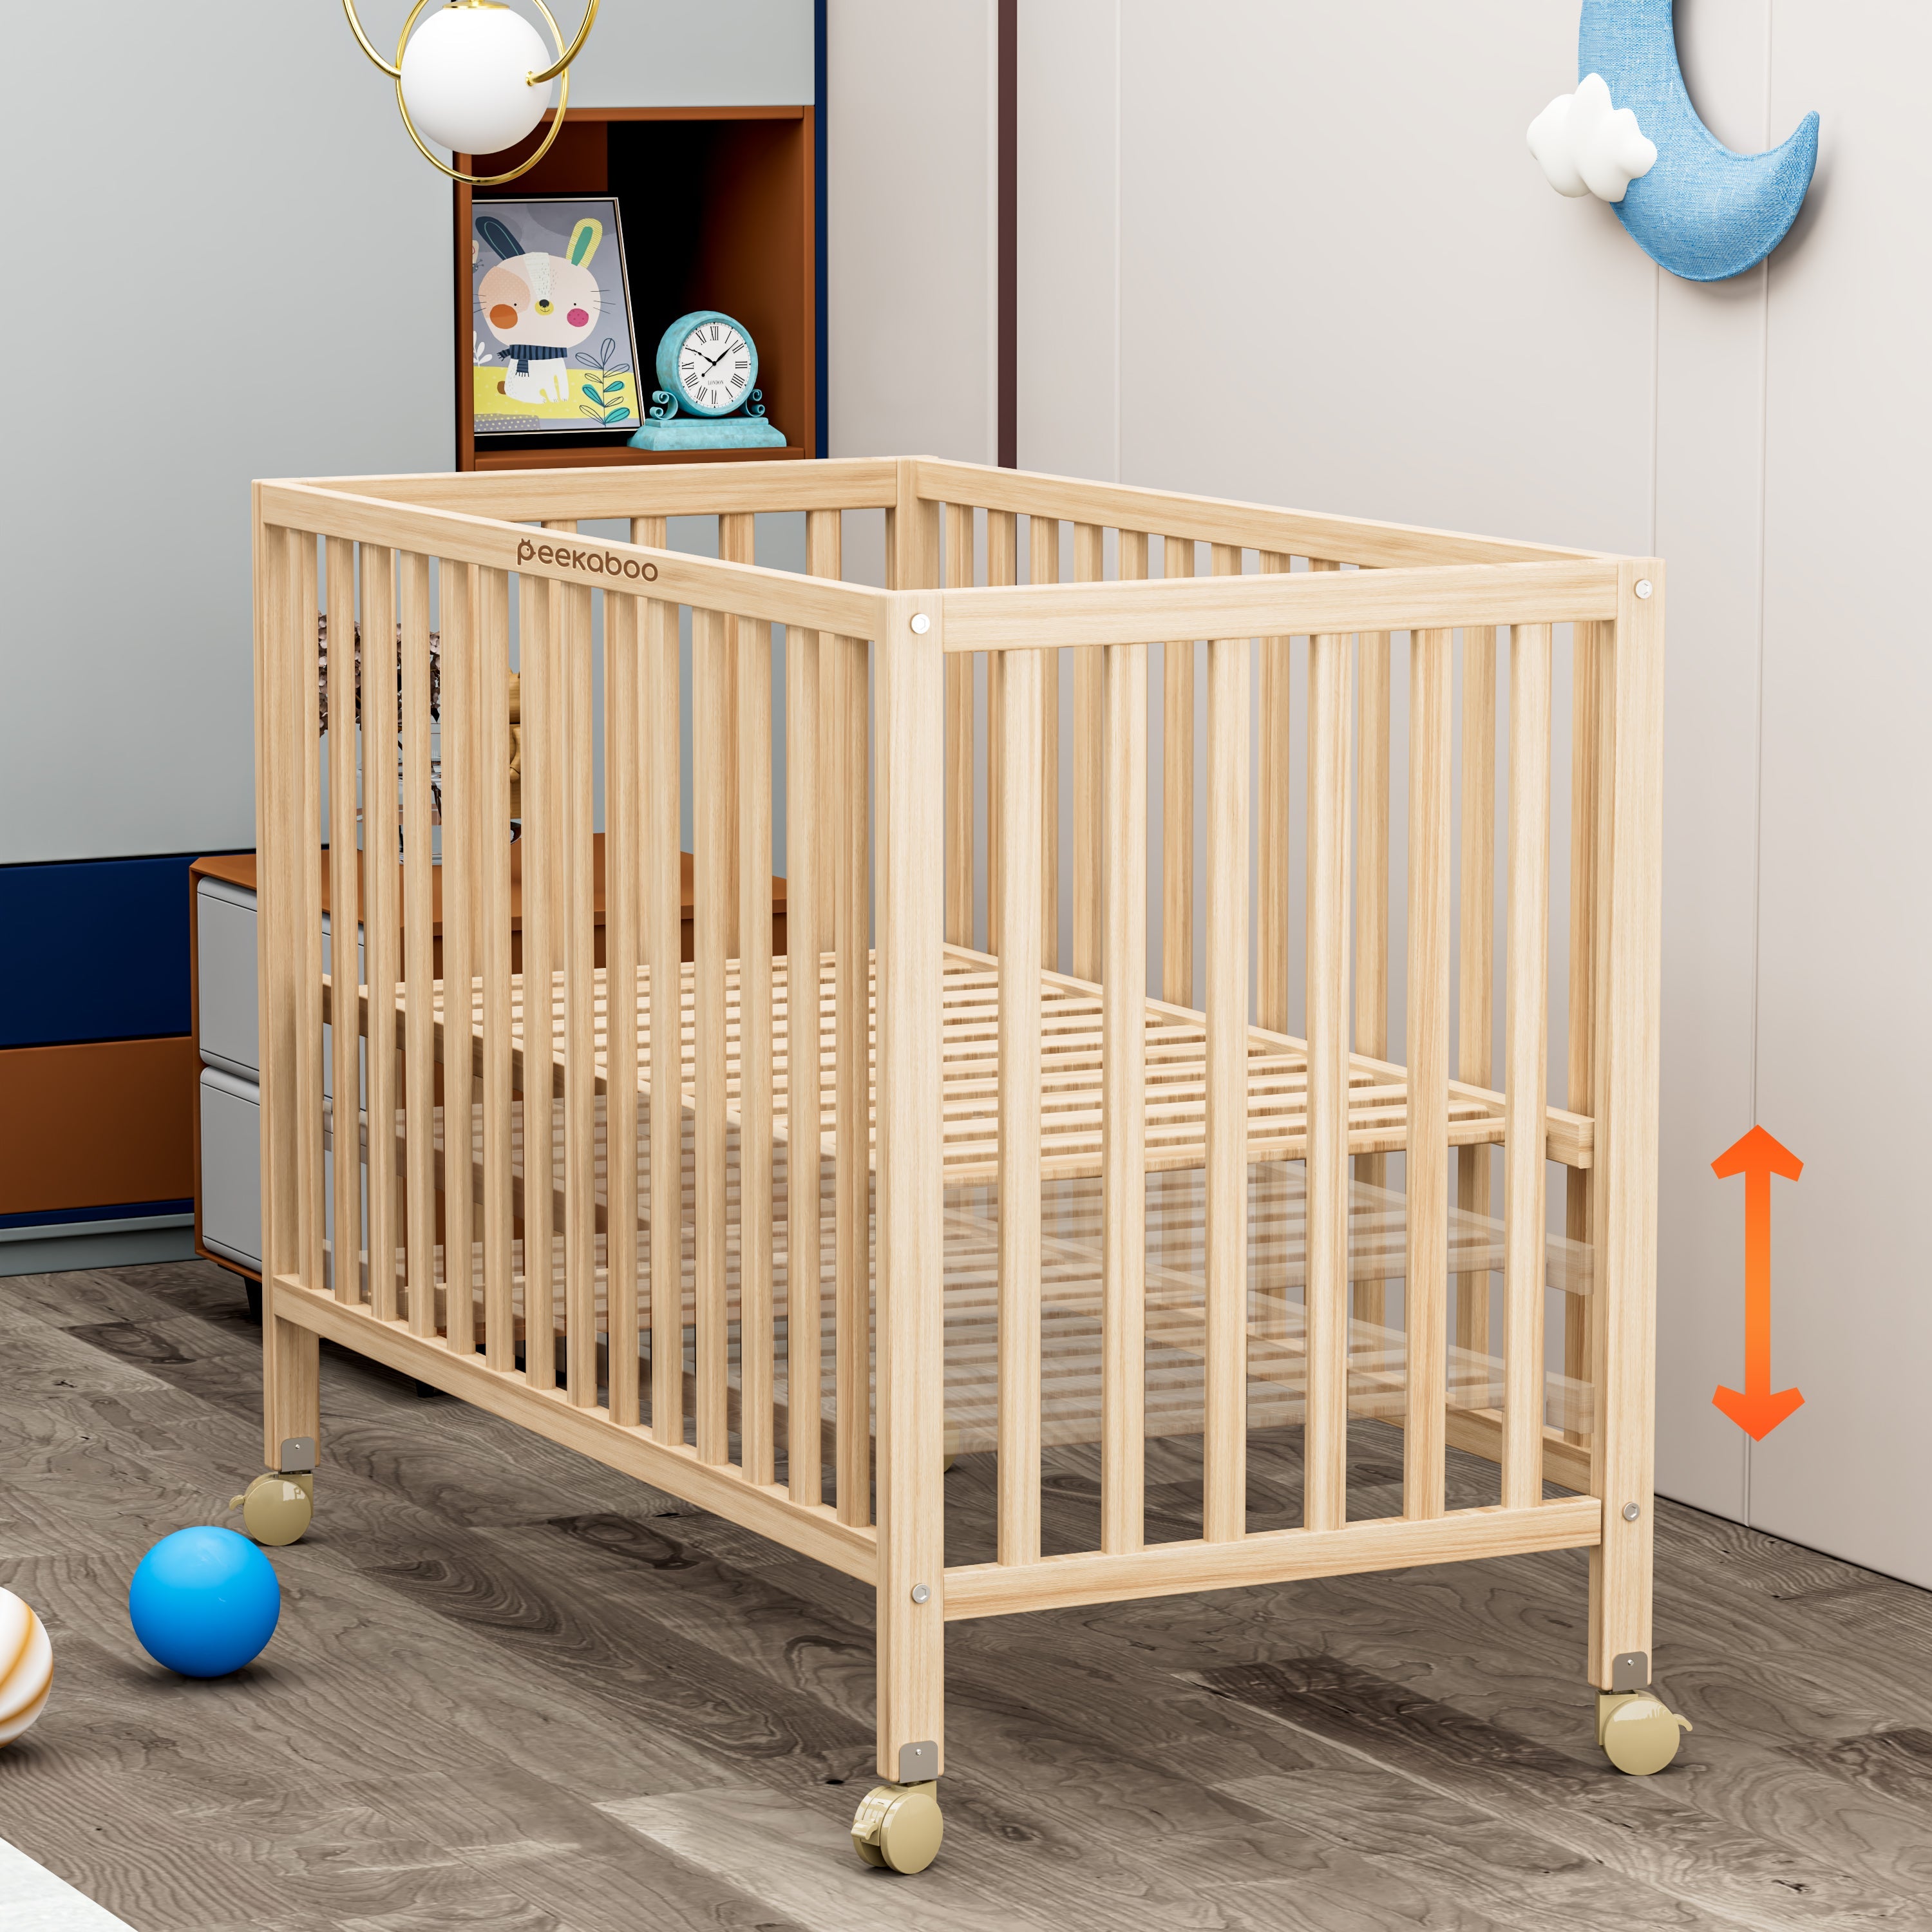 Peekaboo Wooden Cot/ Crib Bed with 3 Level Height Adjustment & Mosquito Net Natural Wood Age- Newborn to 4 Years (Holds upto 50 Kgs)